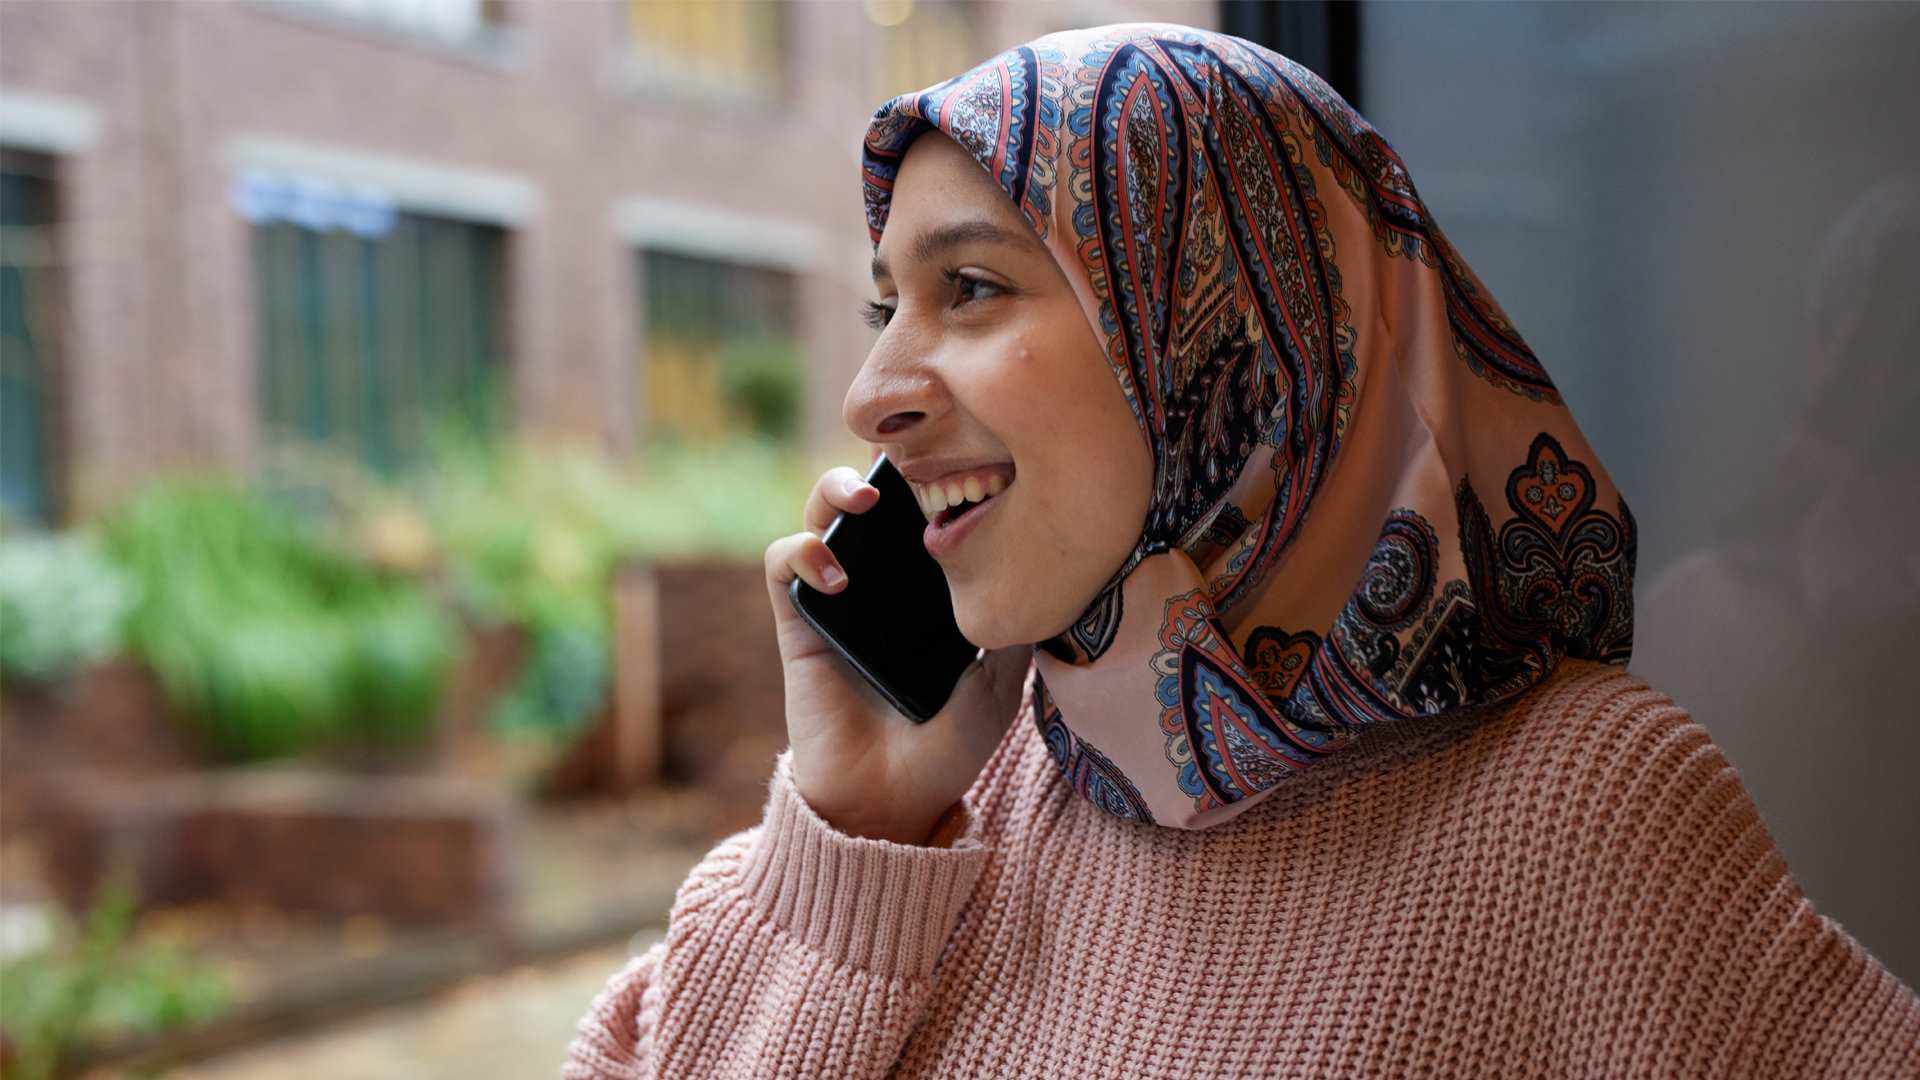 A person wearing a headscarf on the phone.